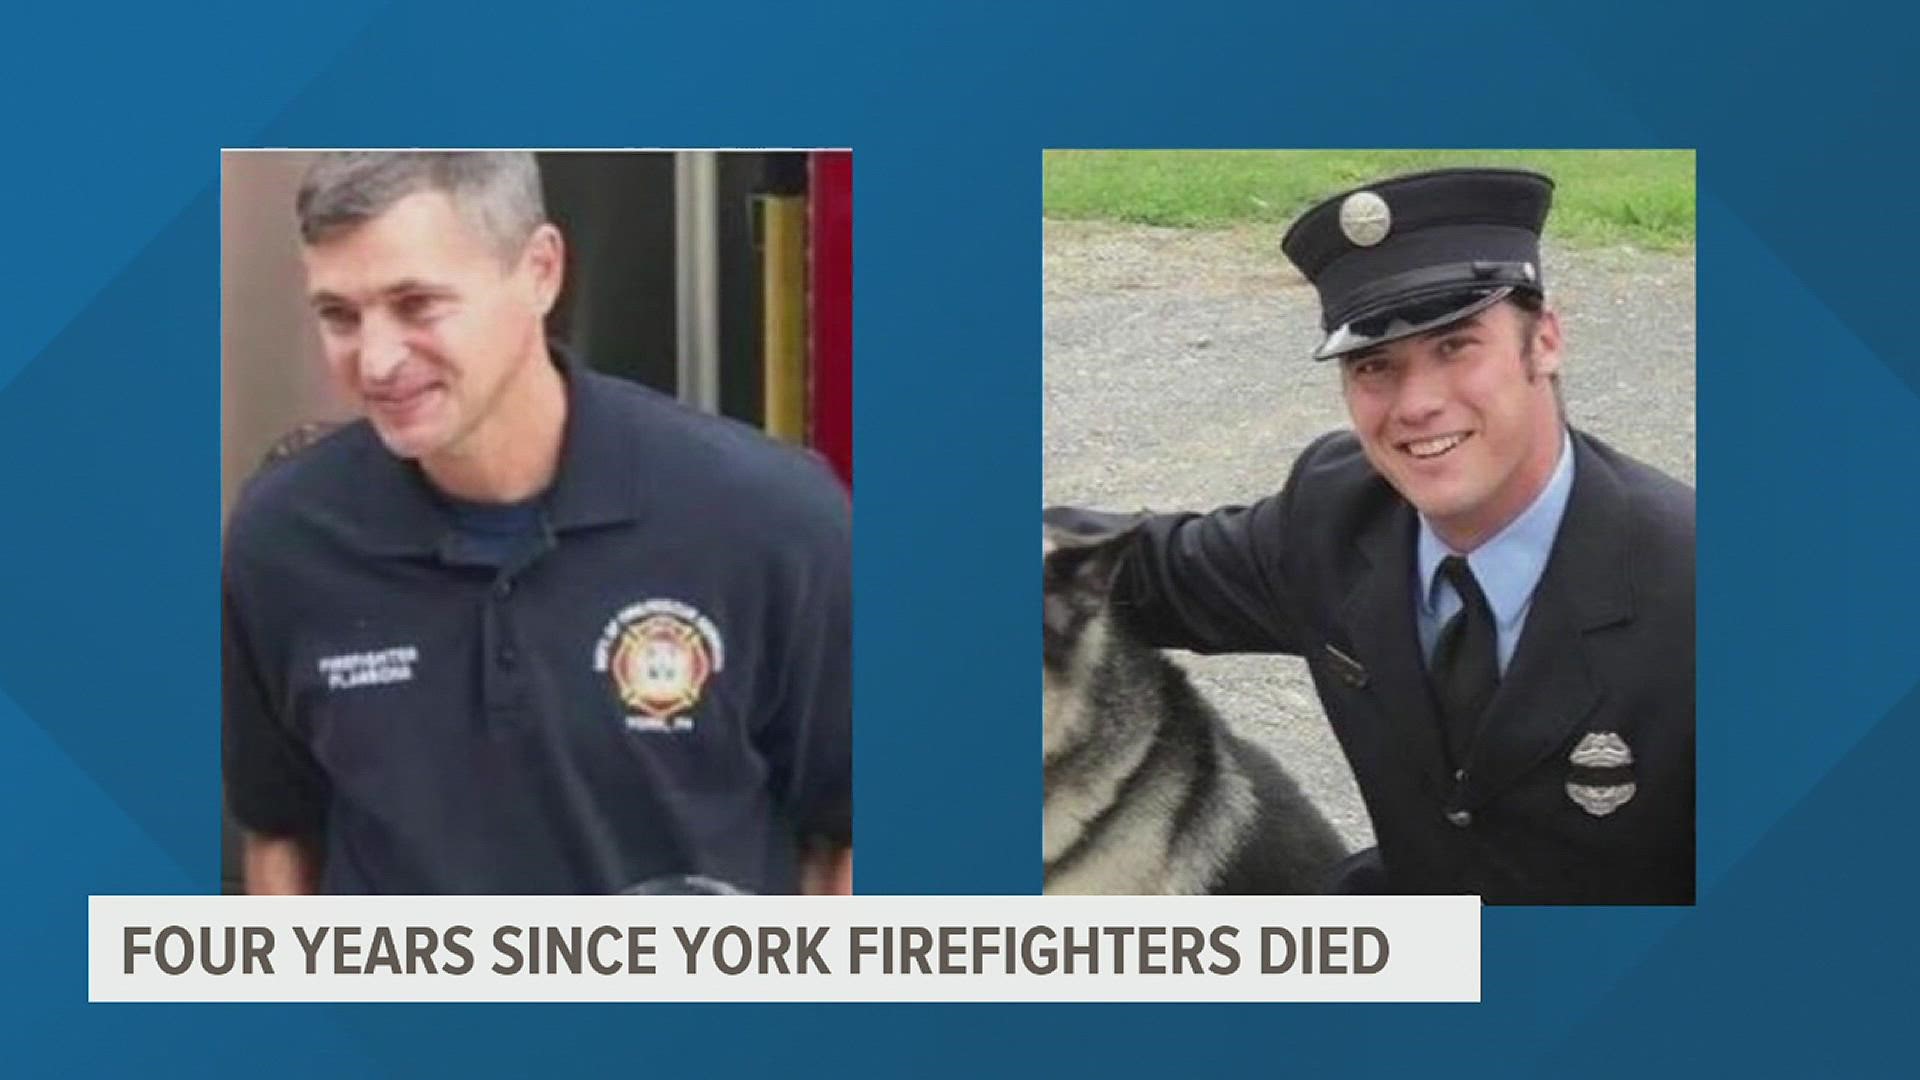 The York Fire Department gathered on March 22 to remember fellow members Ivan Flanscha and Zachary Anthony, who were killed four years ago while in the line of duty.